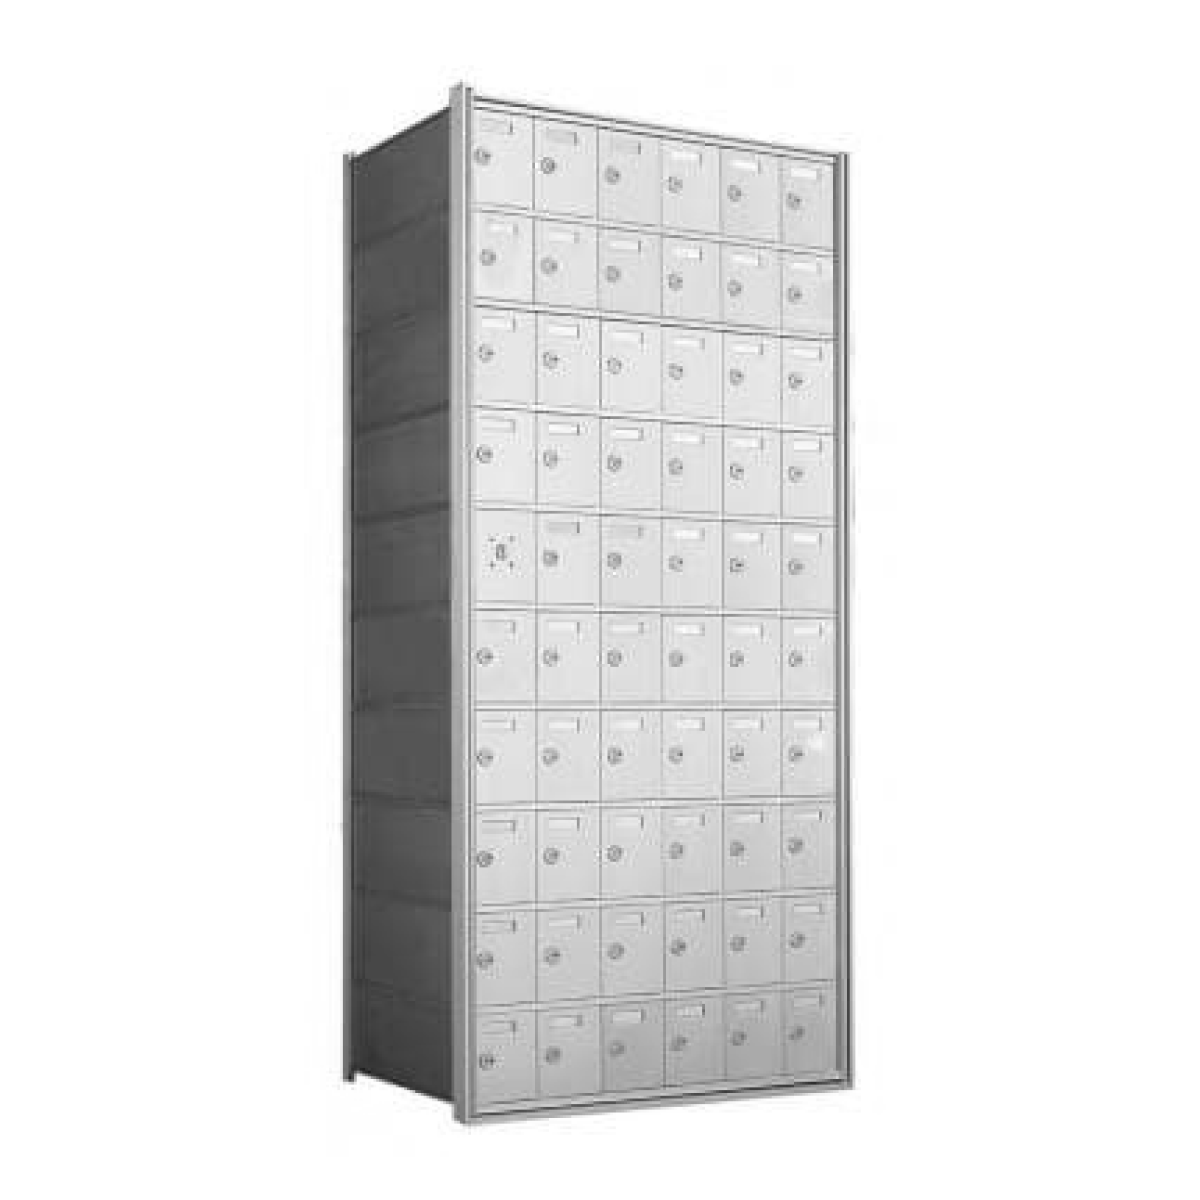 10 Doors High x 6 Doors (59 Tenants) 1600 Series Front-Load Private Distribution Cluster Mailbox in Anodized Aluminum Finish Product Image